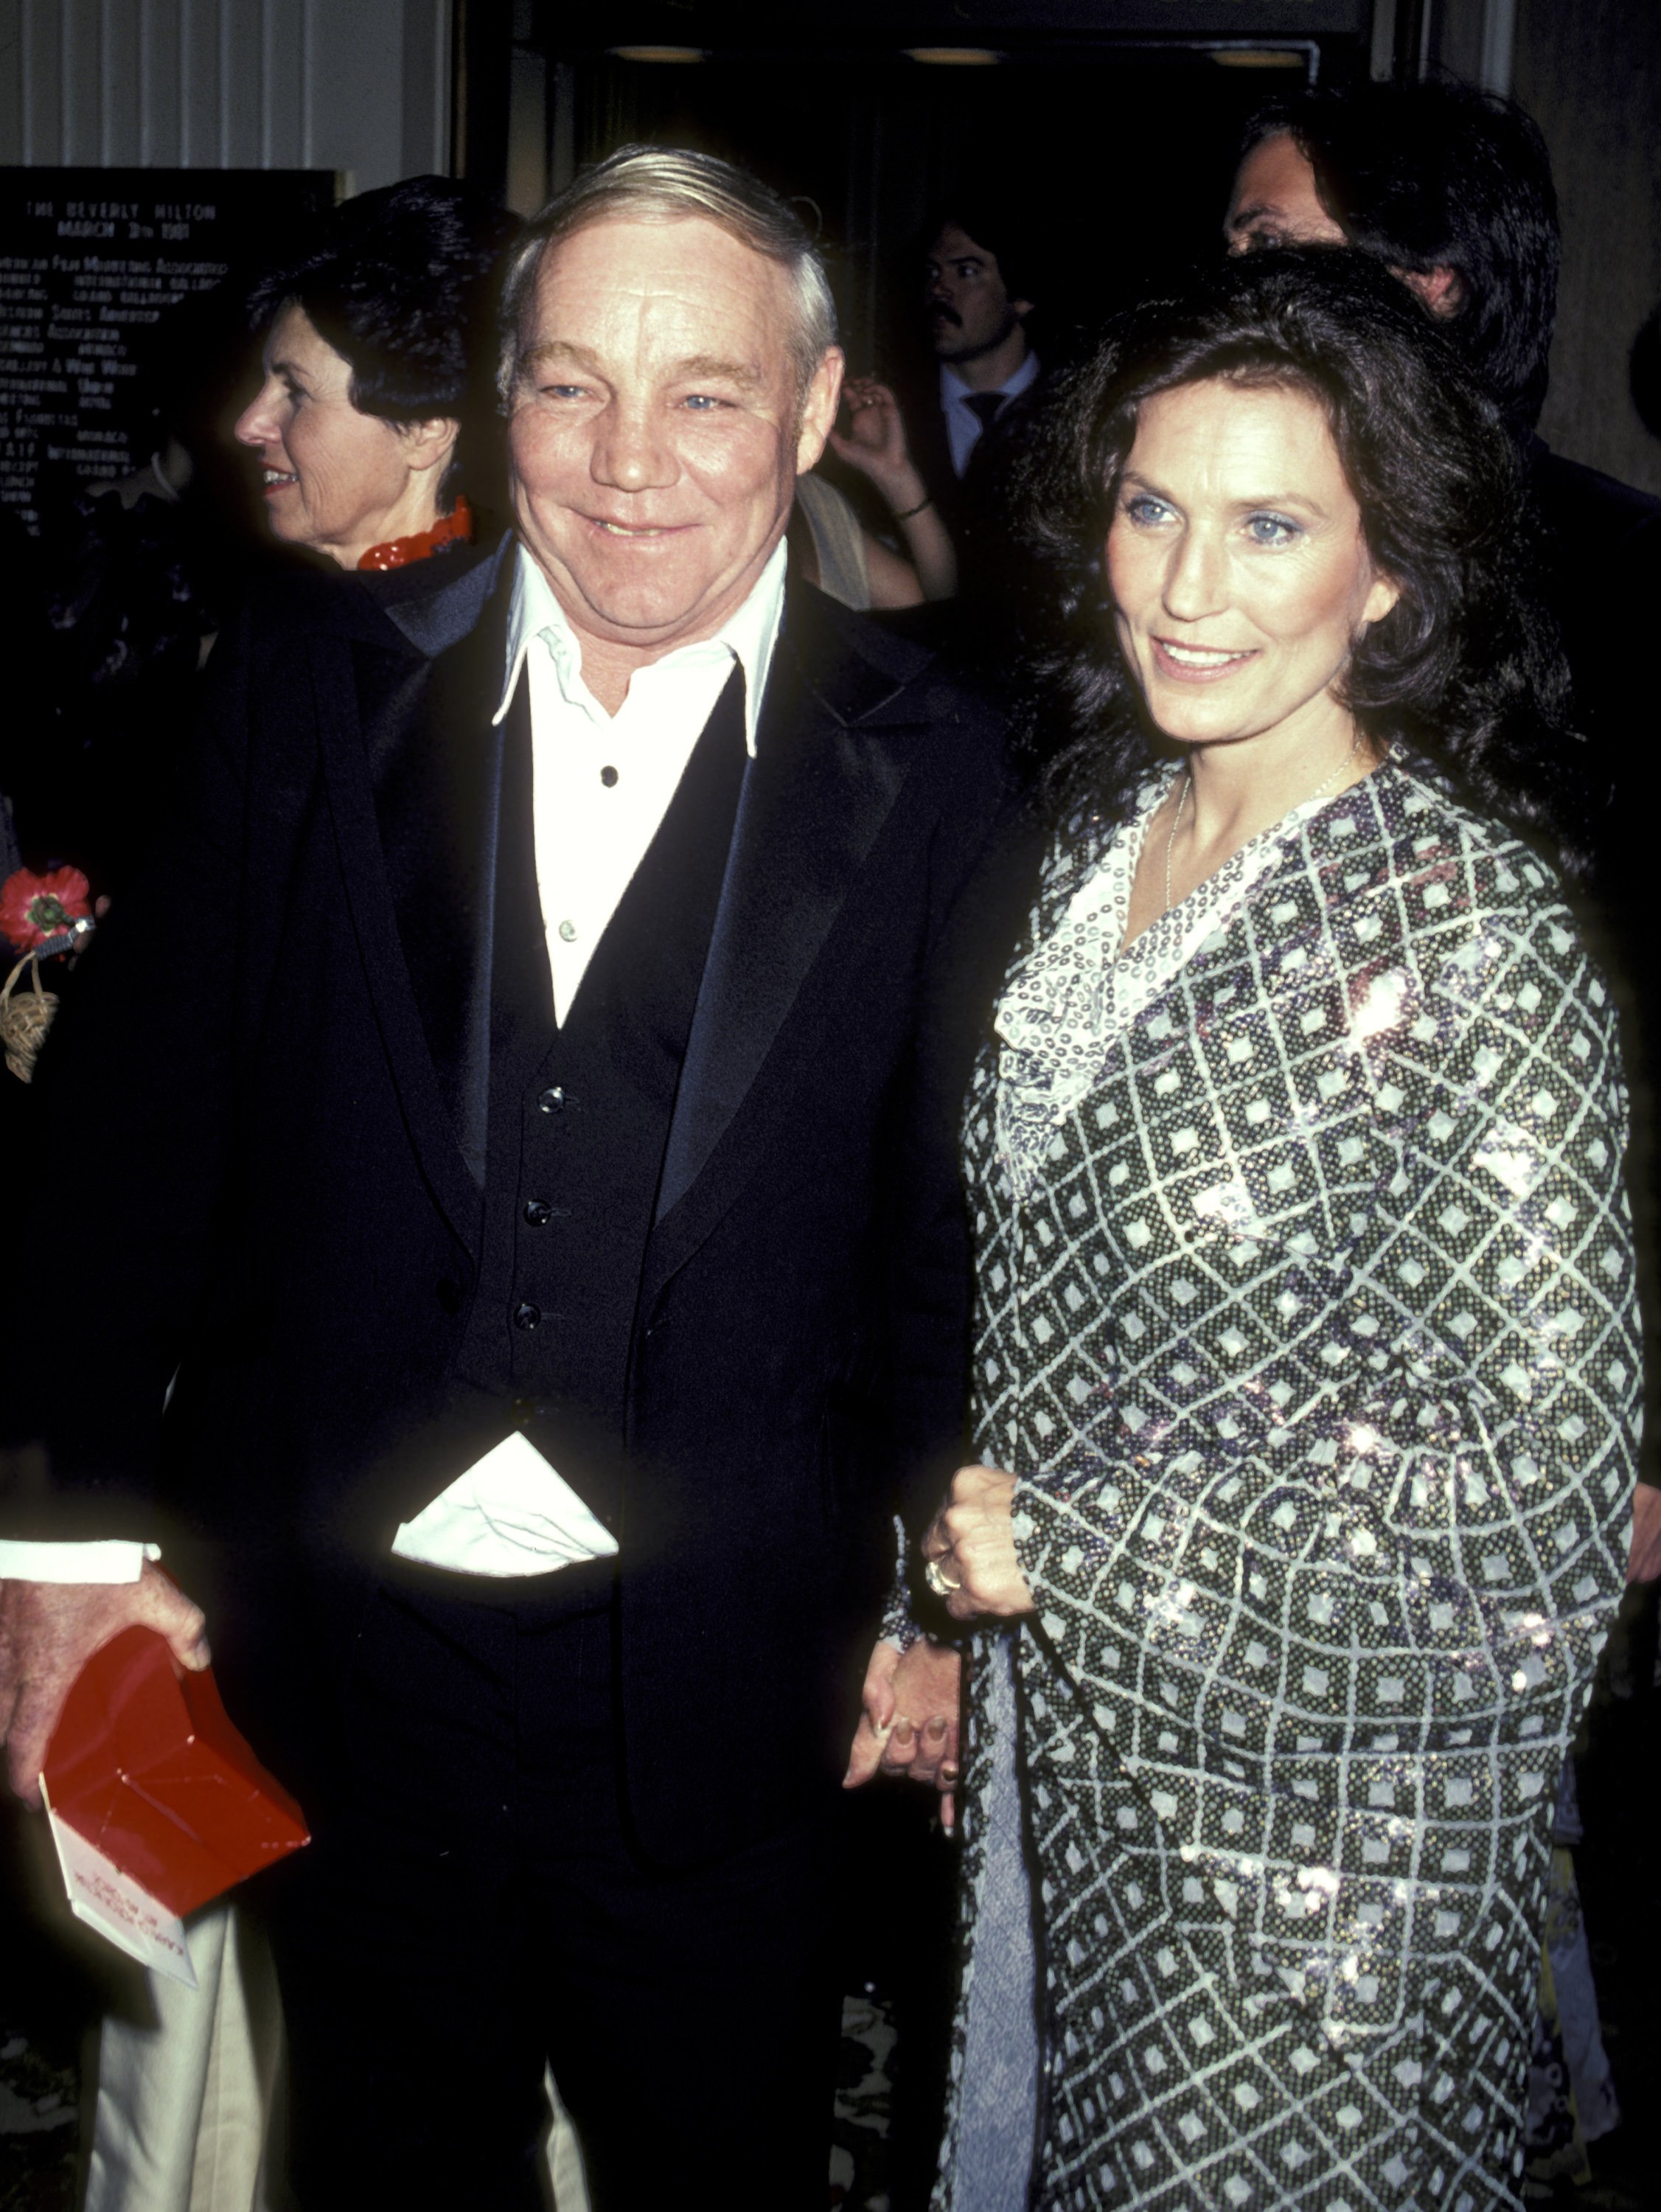 Loretta Lynn and husband Oliver Mooney' Lynn, Jr. at the 53rd Annual Academy Awards Governor's Ball at the Beverly Hilton Hotel in Beverly Hills, California, United States |  Source: Getty Images